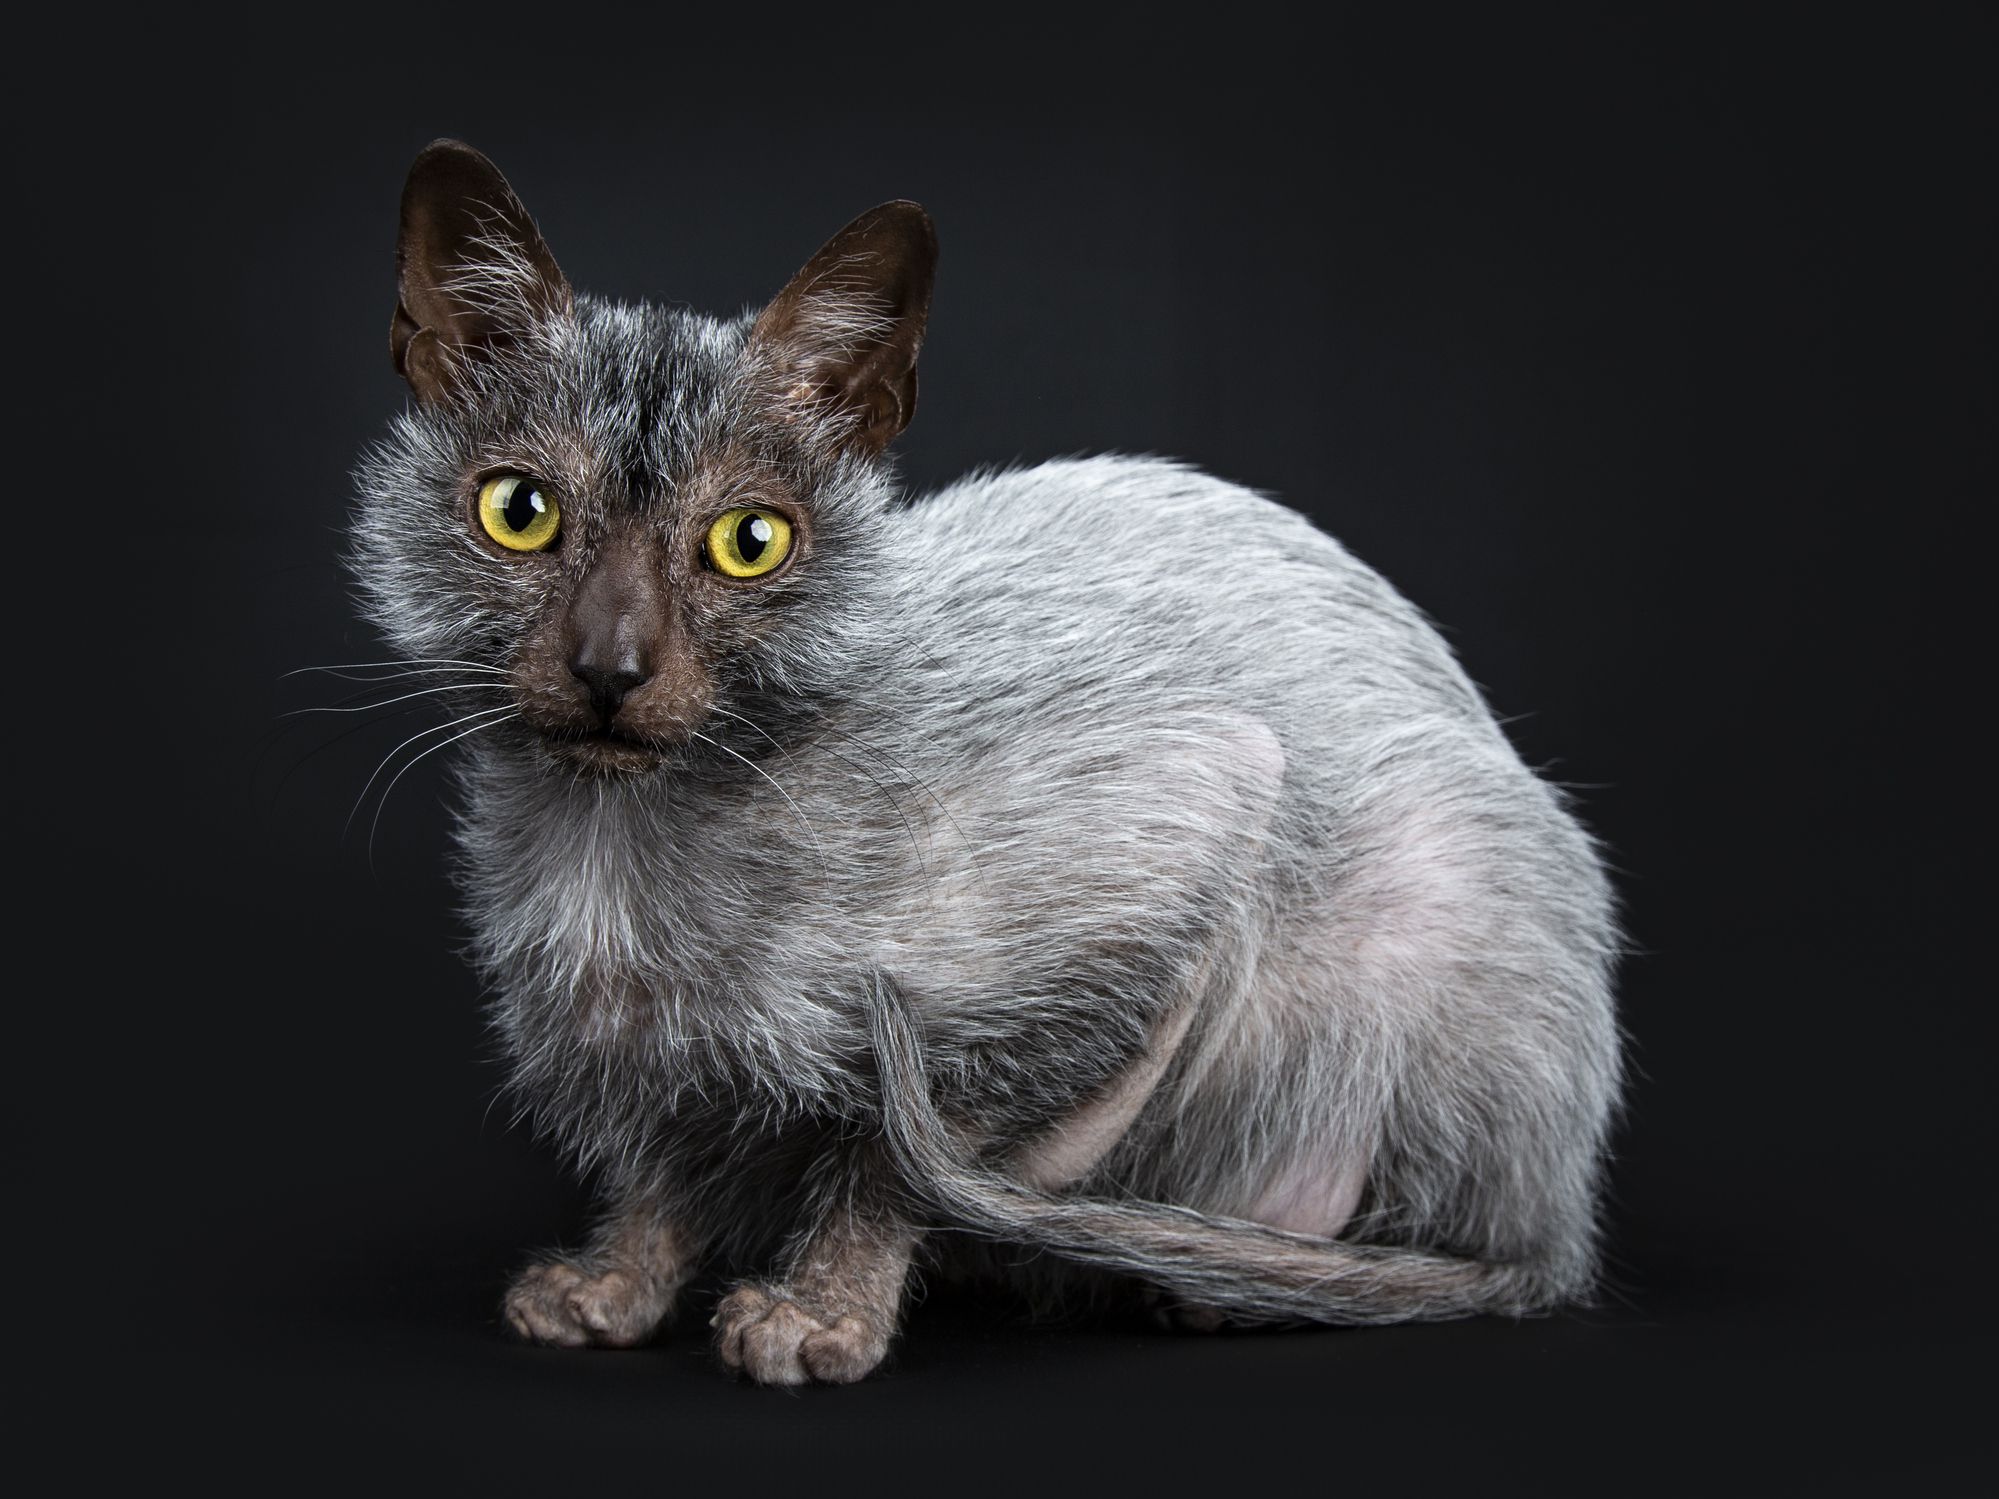 12 Less Known Facts About Lykoi Cats We Bet You Don’t Yet!